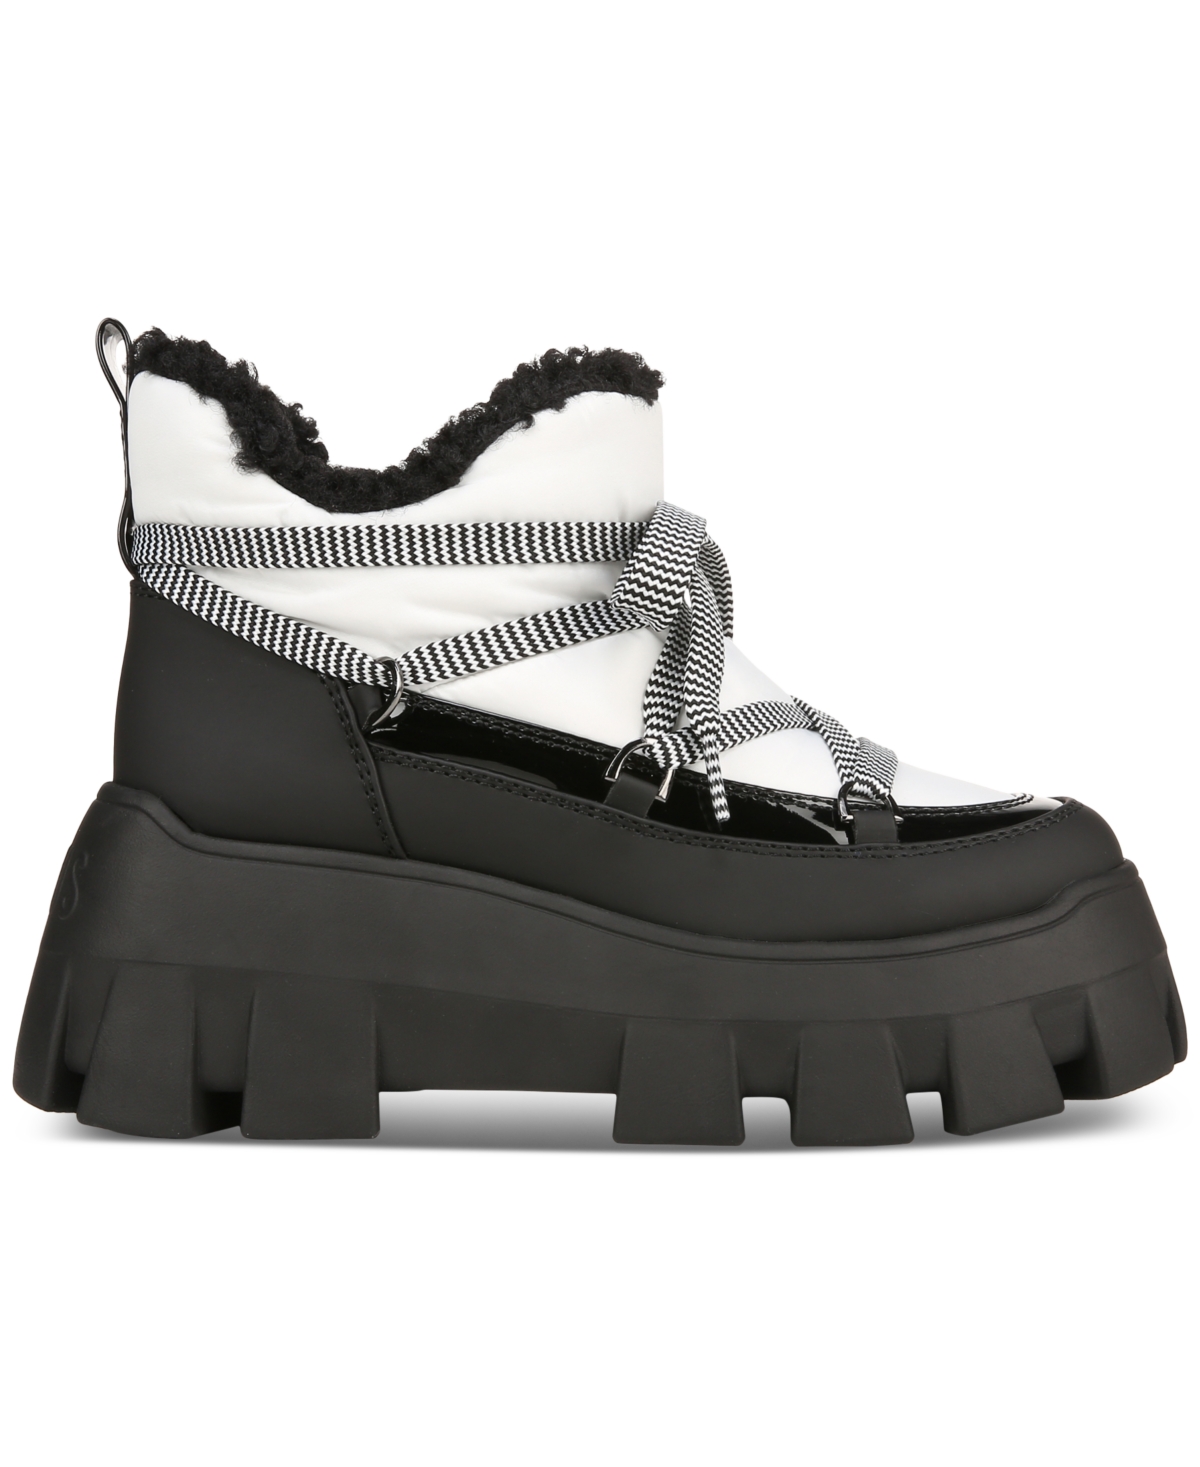 Shop Circus Ny Women's Ali Lace-up Lug Platform Moon Boots In Soft Silver Metallic